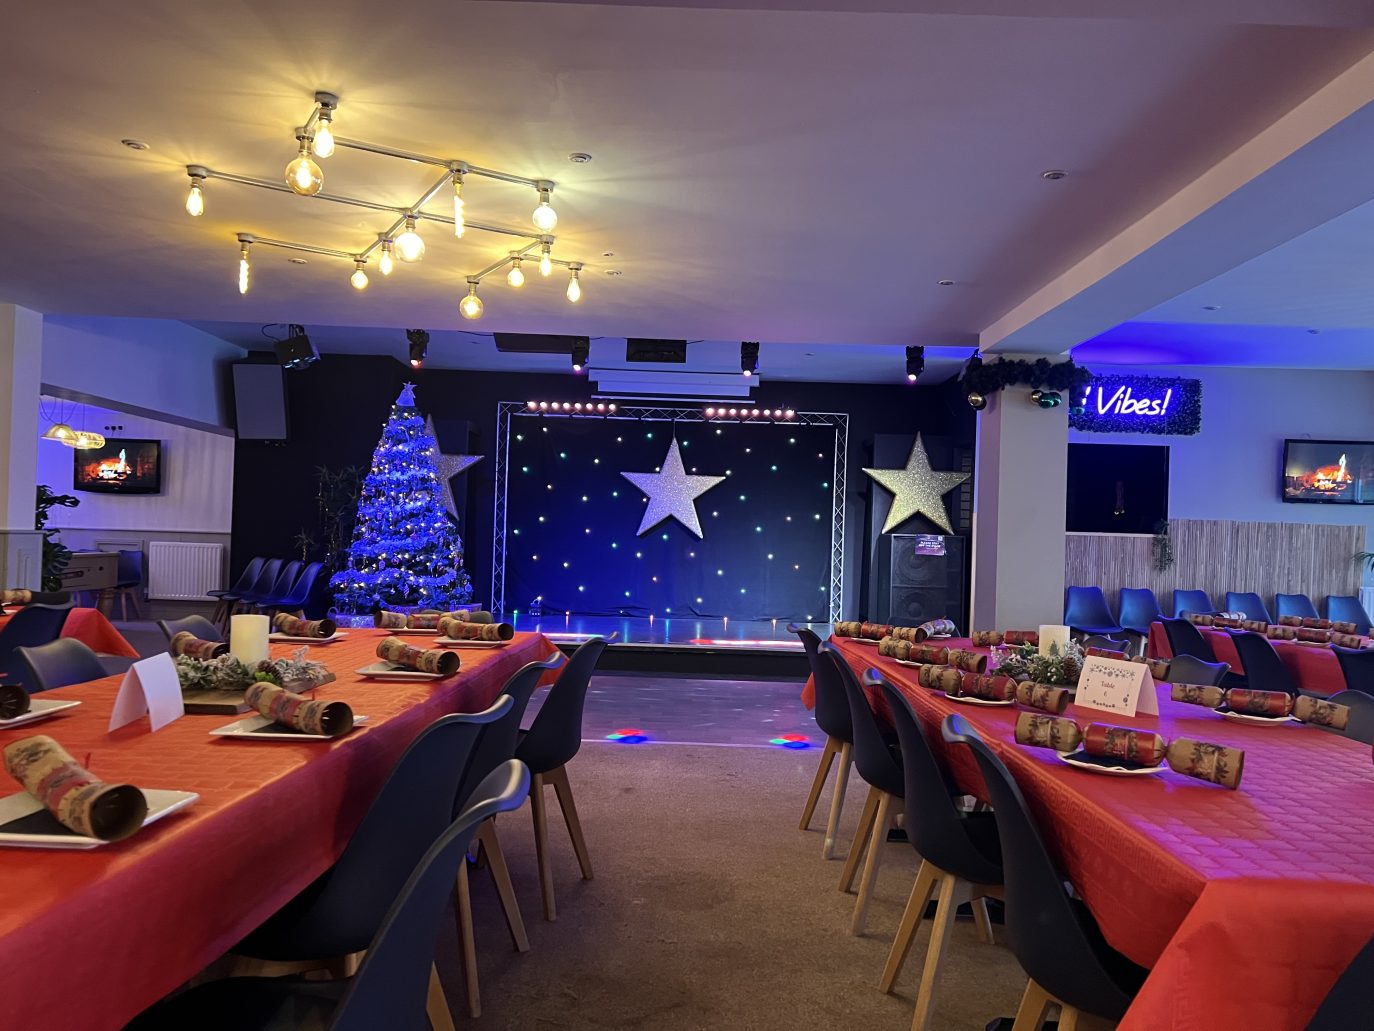 A festive event hall with a stage decorated with star motifs and blue lighting, surrounded by tables set with red tablecloths, christmas crackers, and a large, lit monkey tree to the left.